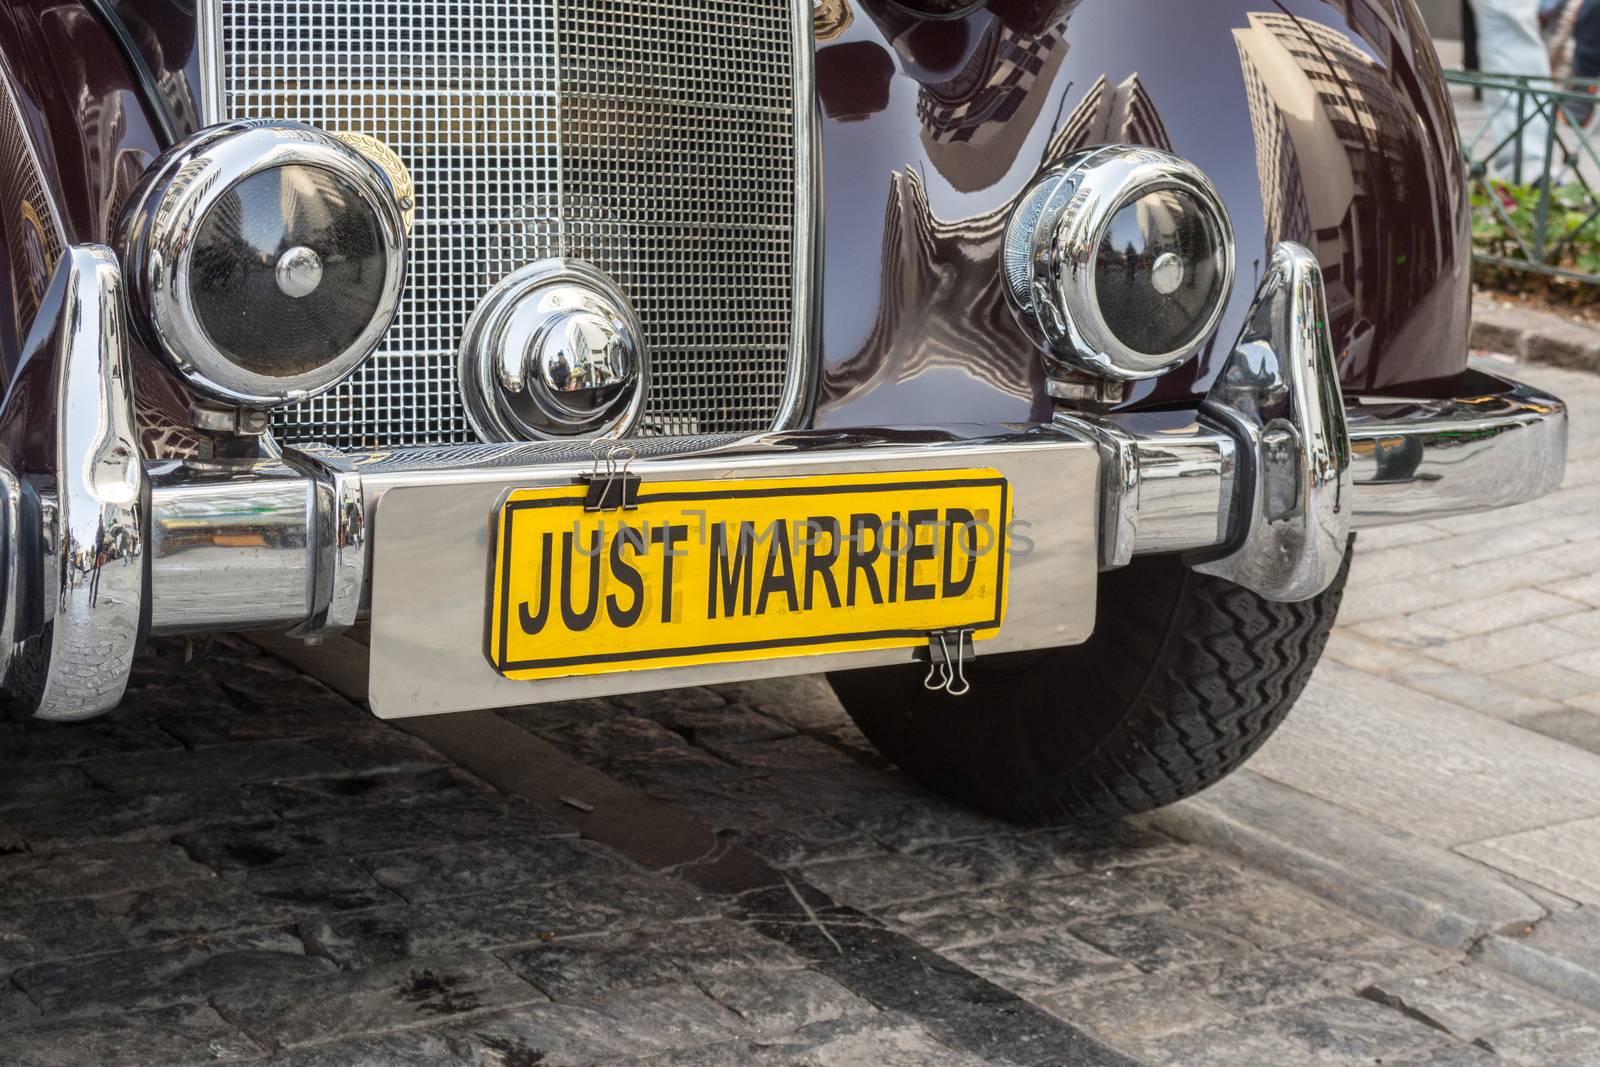 One classical, polished old car used for transportation of wedding with a yellow "JUST MARRIED" license plate - street photography